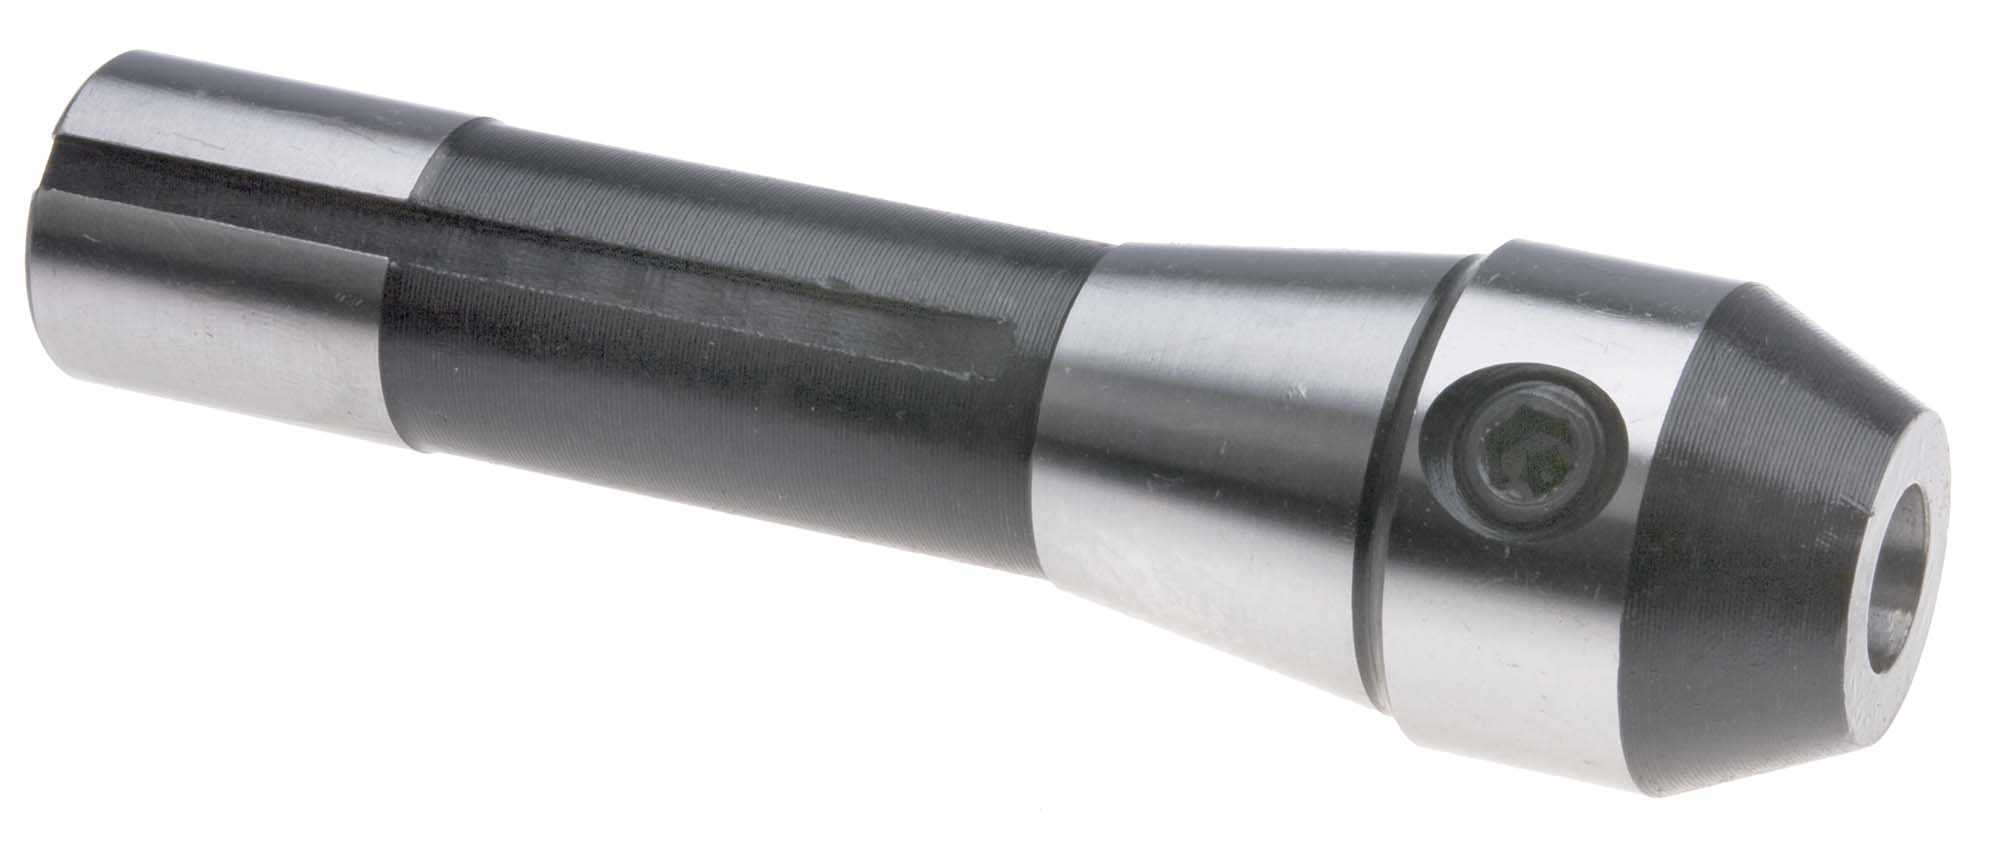 1" R8 End Mill Adapter